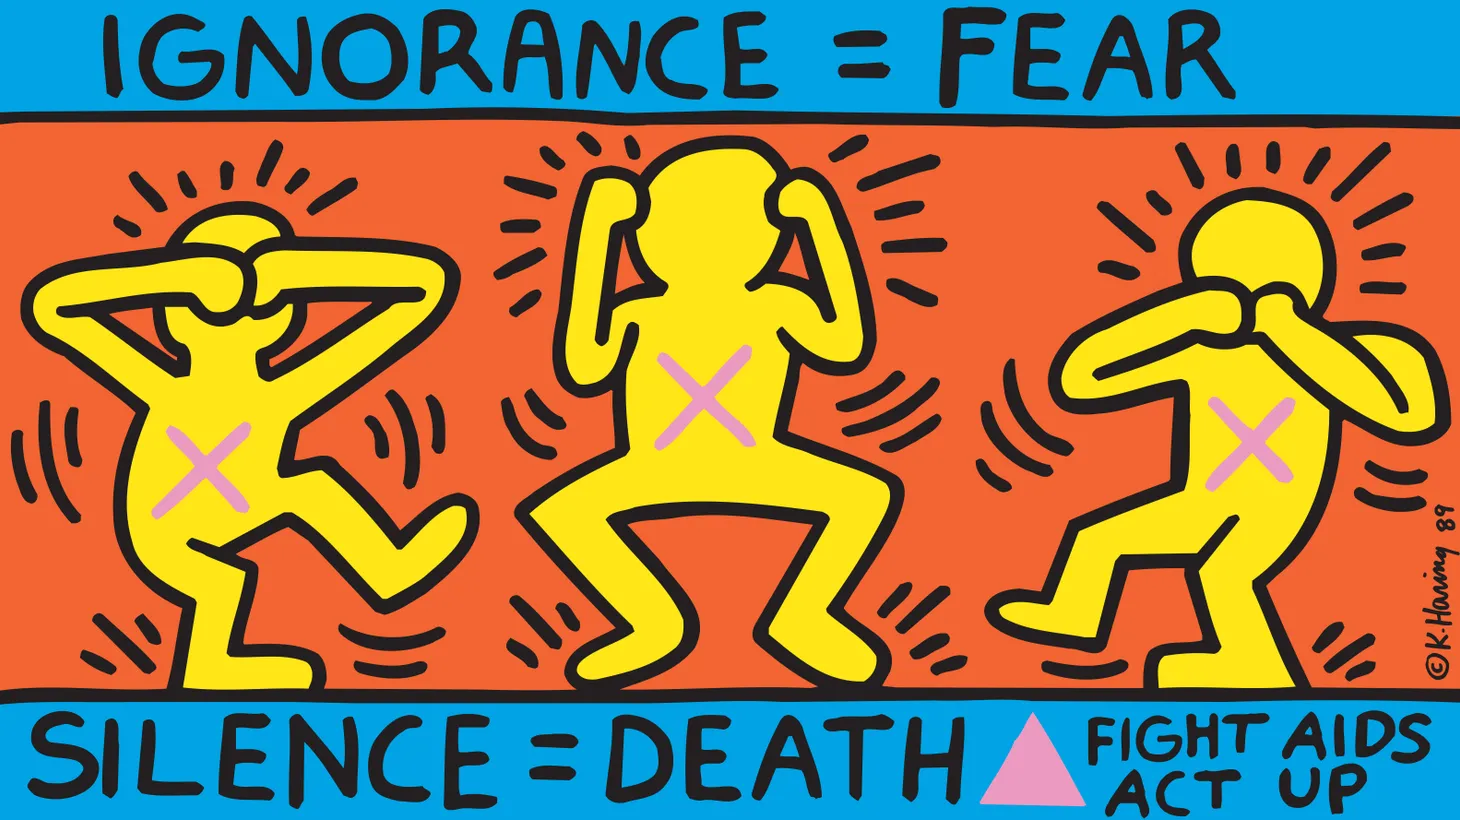 Keith Haring’s work had a strong political focus as he made pieces for groups fighting nuclear arms, AIDS and more.